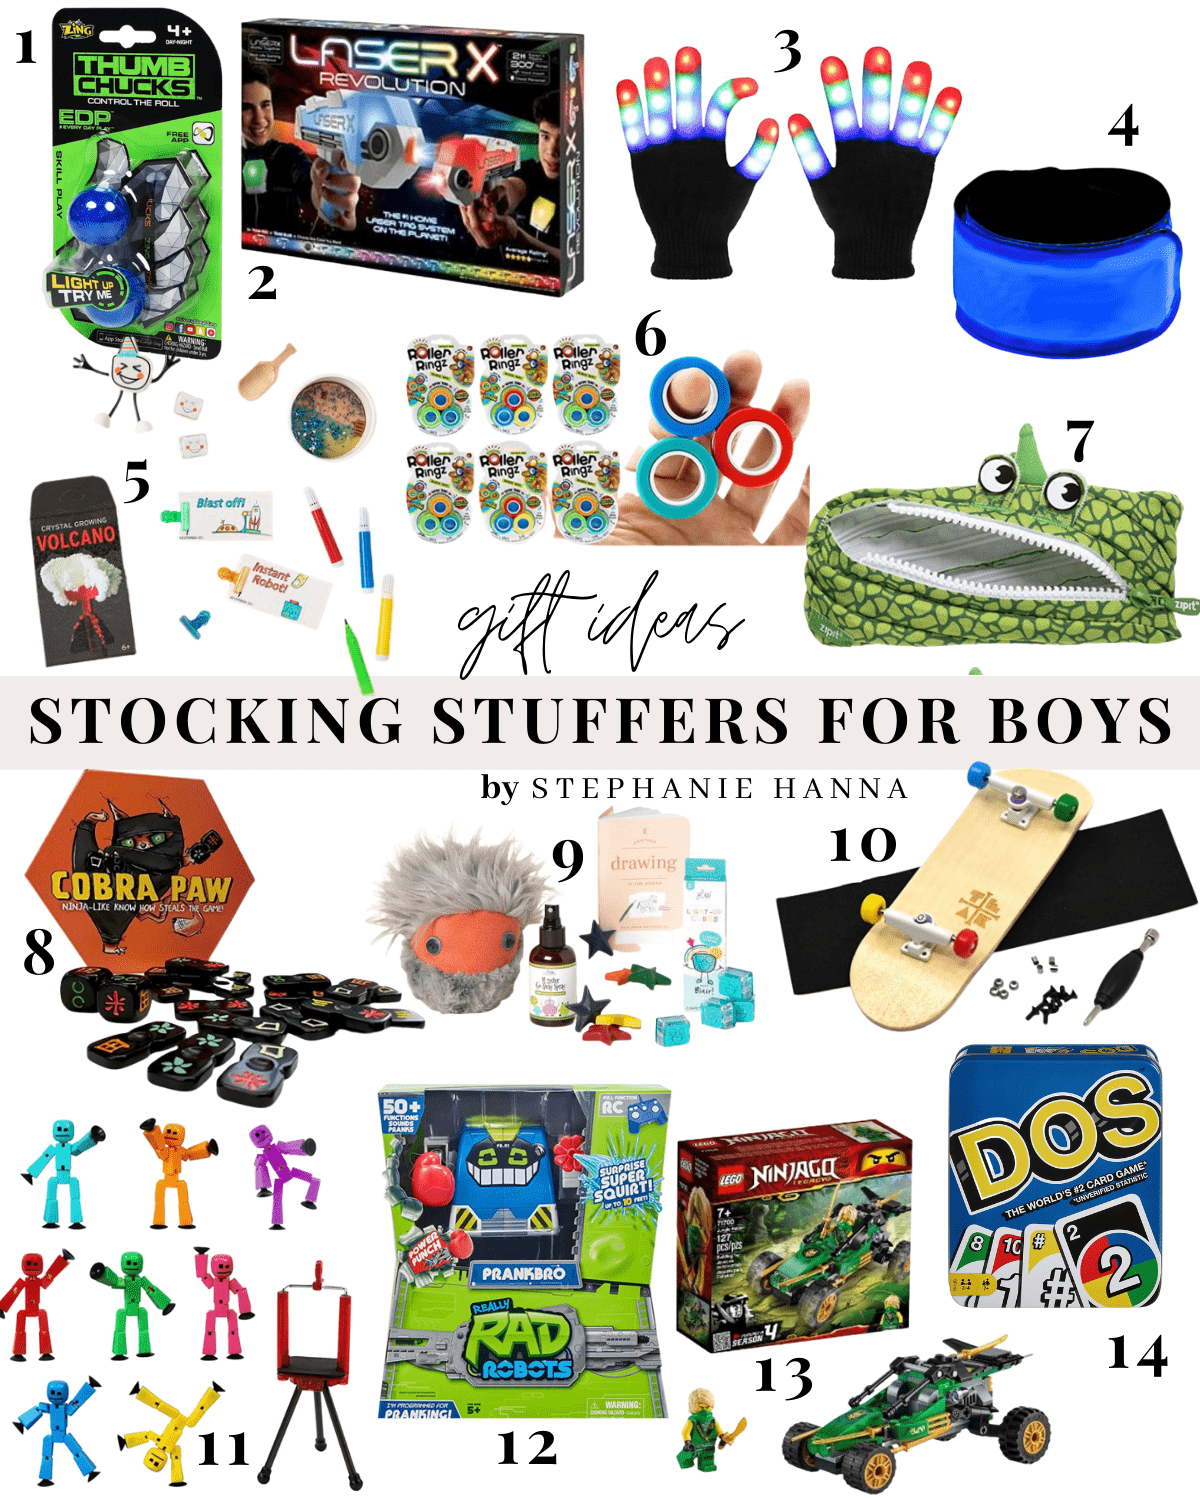 Top 10 Stocking Stuffers for Friends and Family